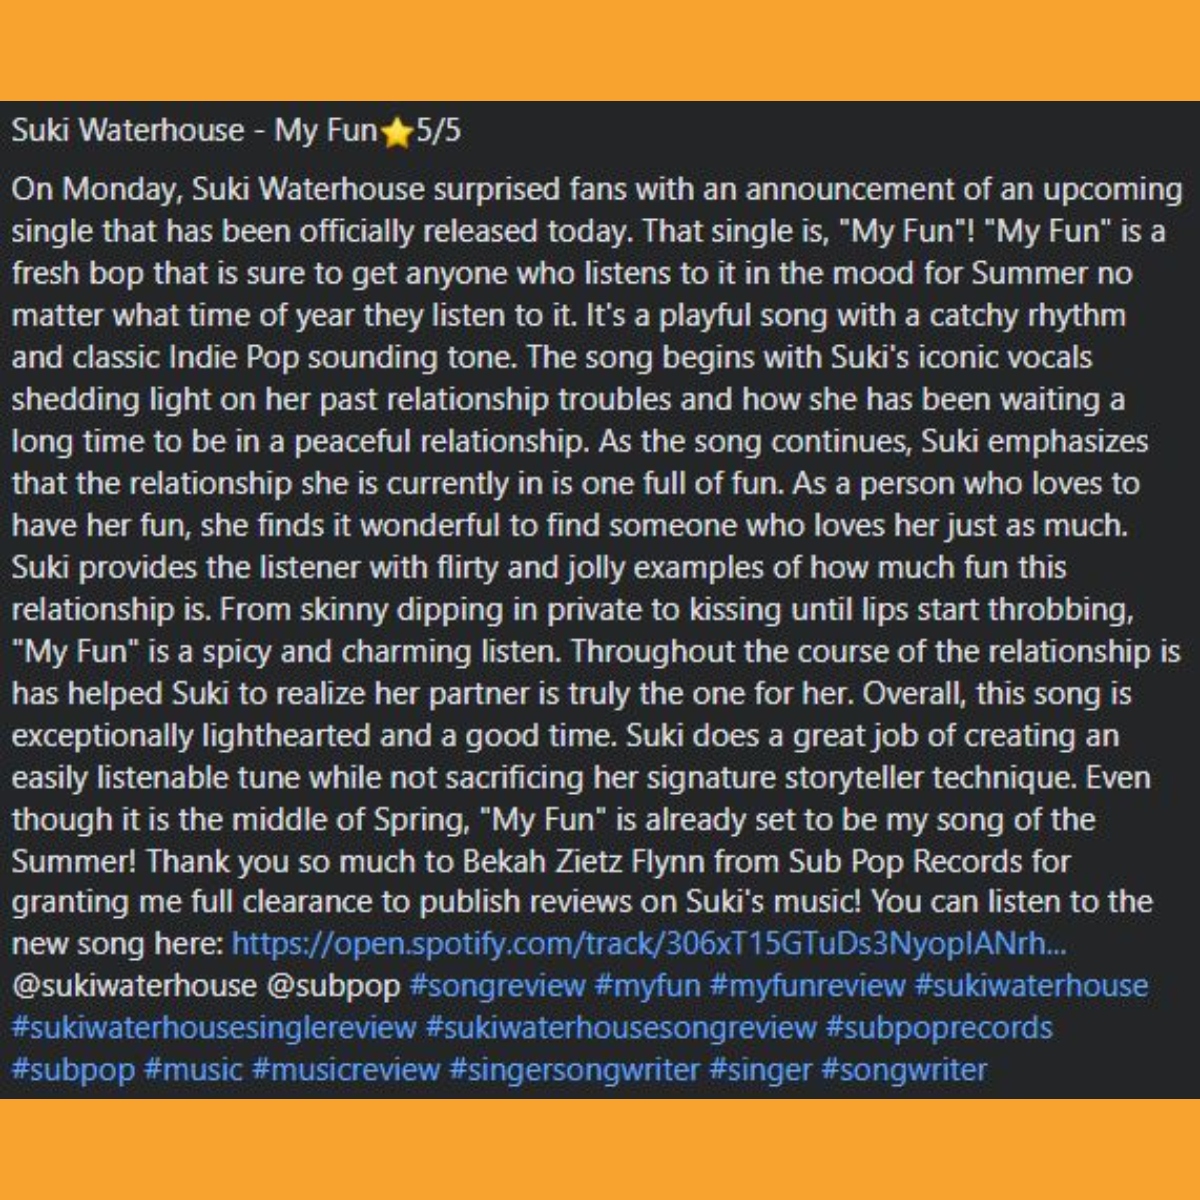 Suki Waterhouse - My Fun⭐5/5

Suki Waterhouse - My Fun Single Review

You can check out the song here: open.spotify.com/track/306xT15G…

@sukiwaterhouse @subpop #singlereview #songreview #myfun #myfunreview #sukiwaterhouse #sukiwaterhousesongreview